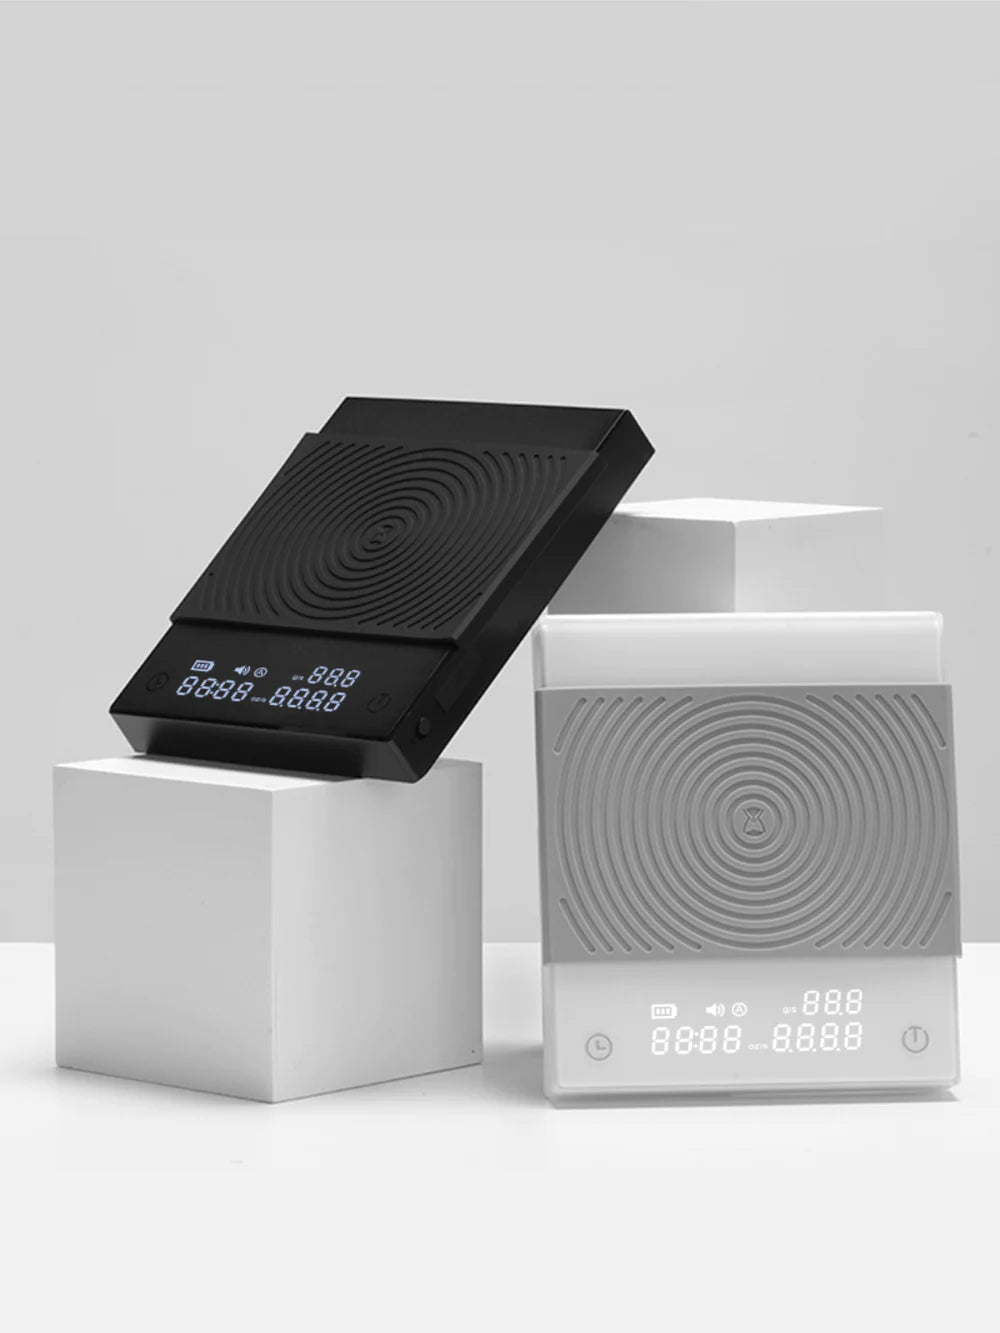 Timemore Black Mirror BASIC 2 Coffee Scale - Image 9